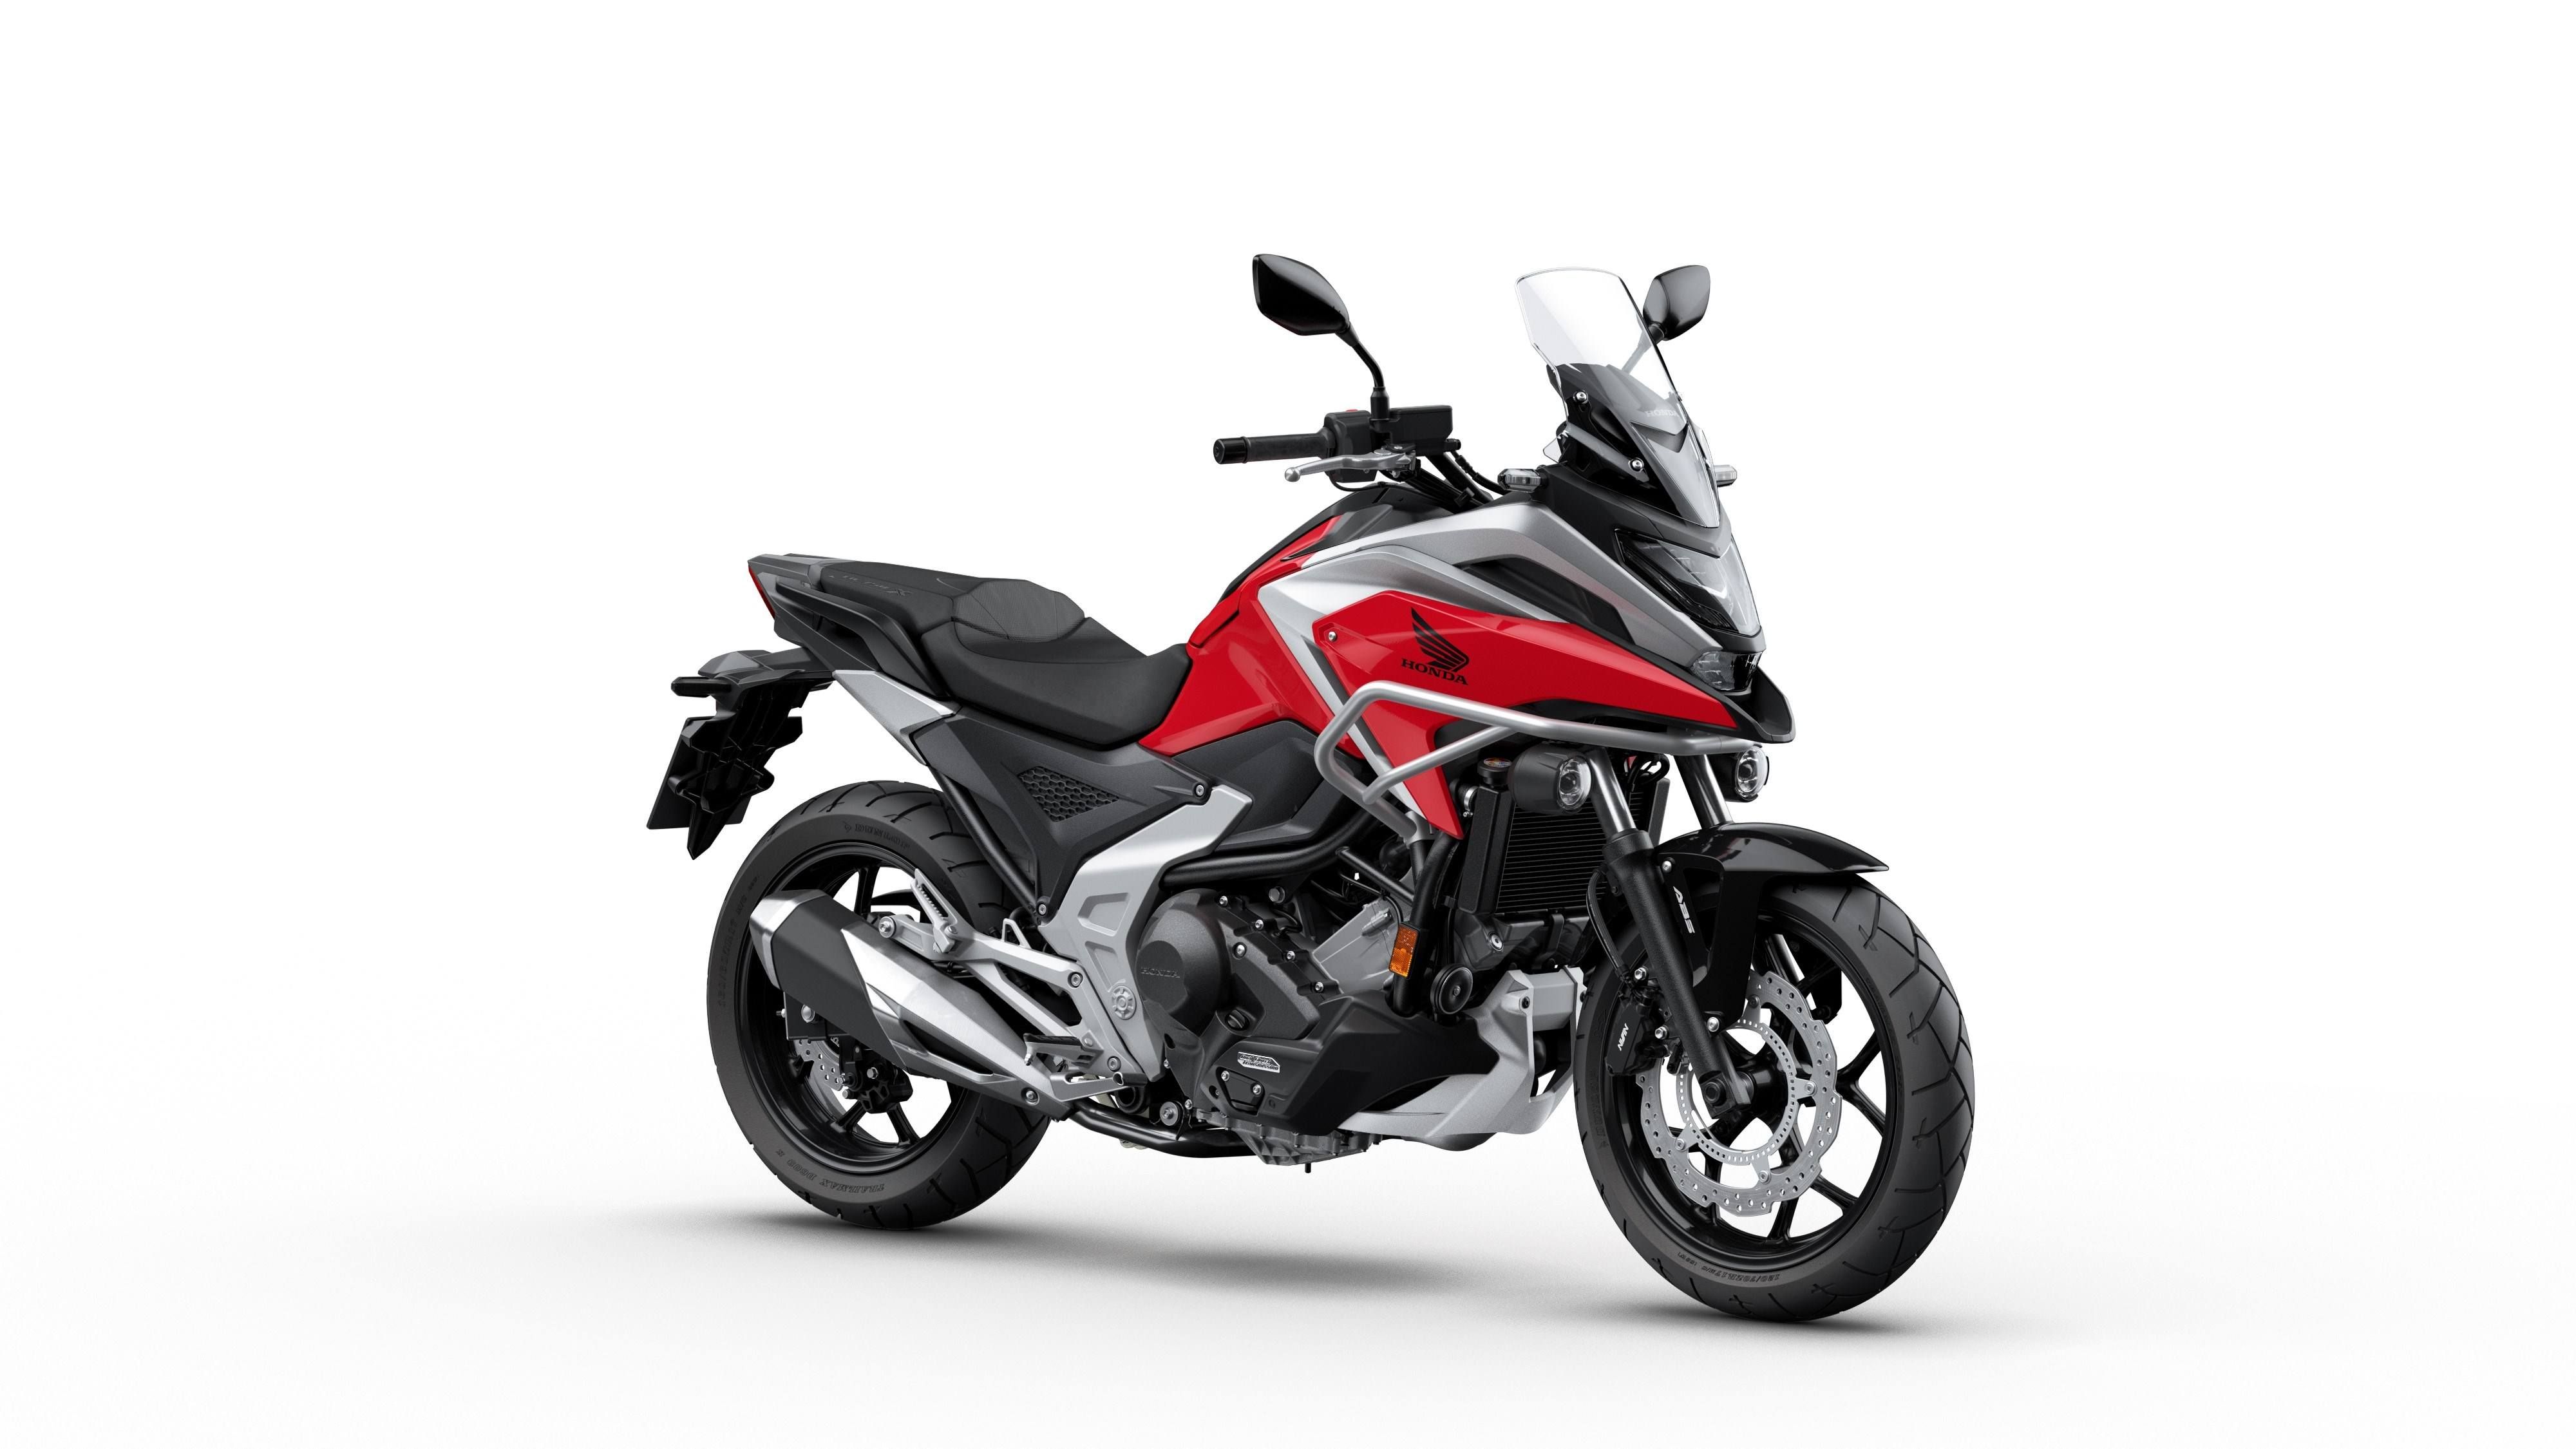 10 Things Every Motorcycle Enthusiast Should Know About The 2022 Honda